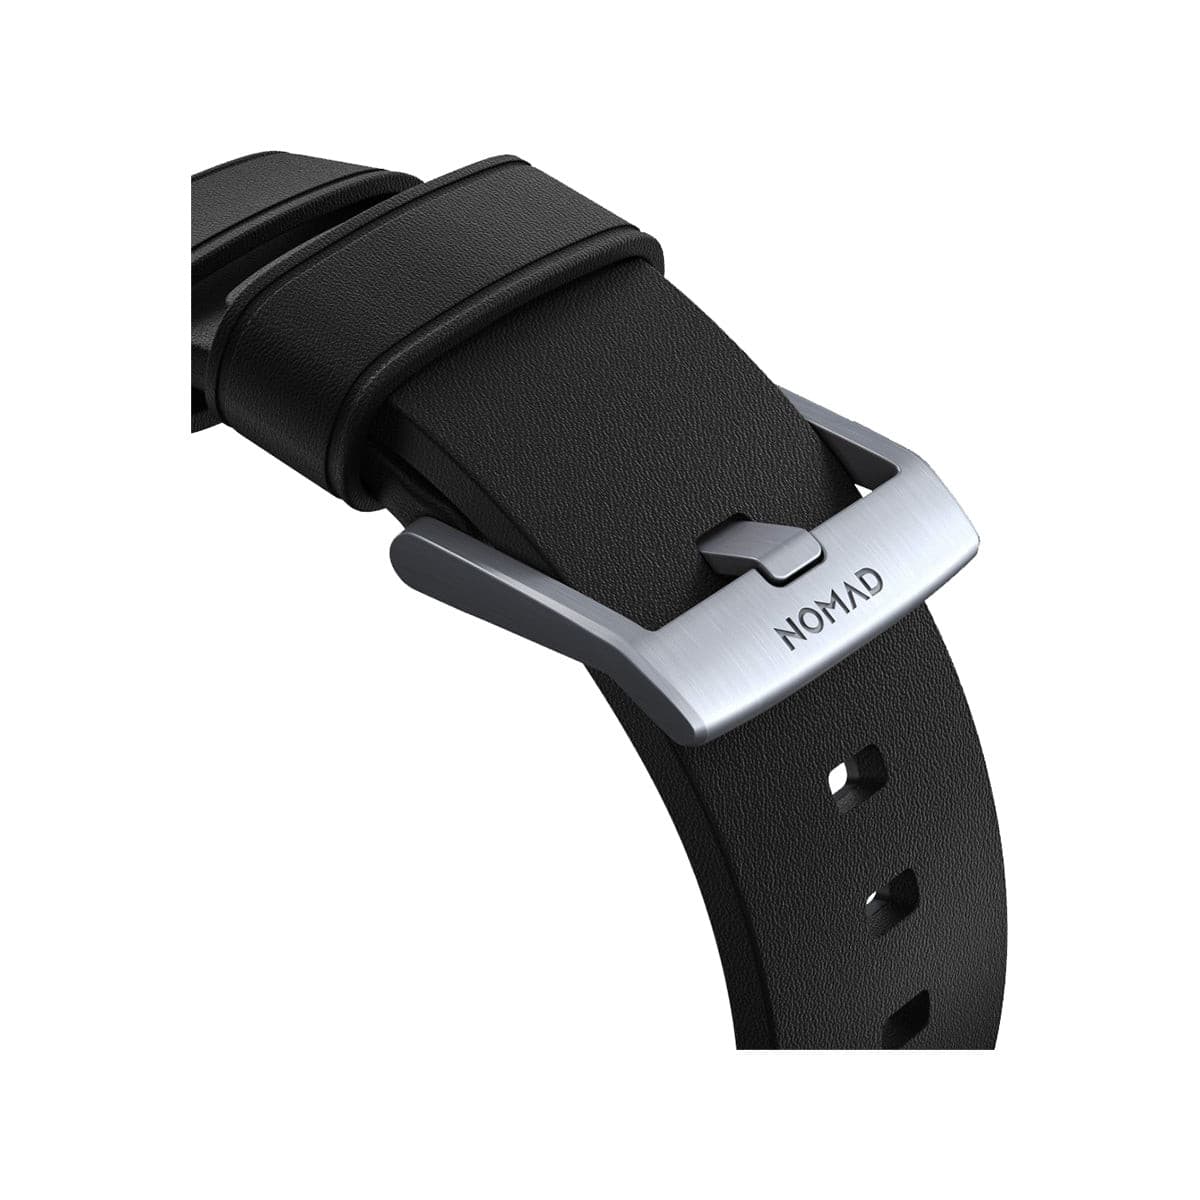 Nomad Active Band Pro 45mm - Silver Hard with Black Leather Strap.